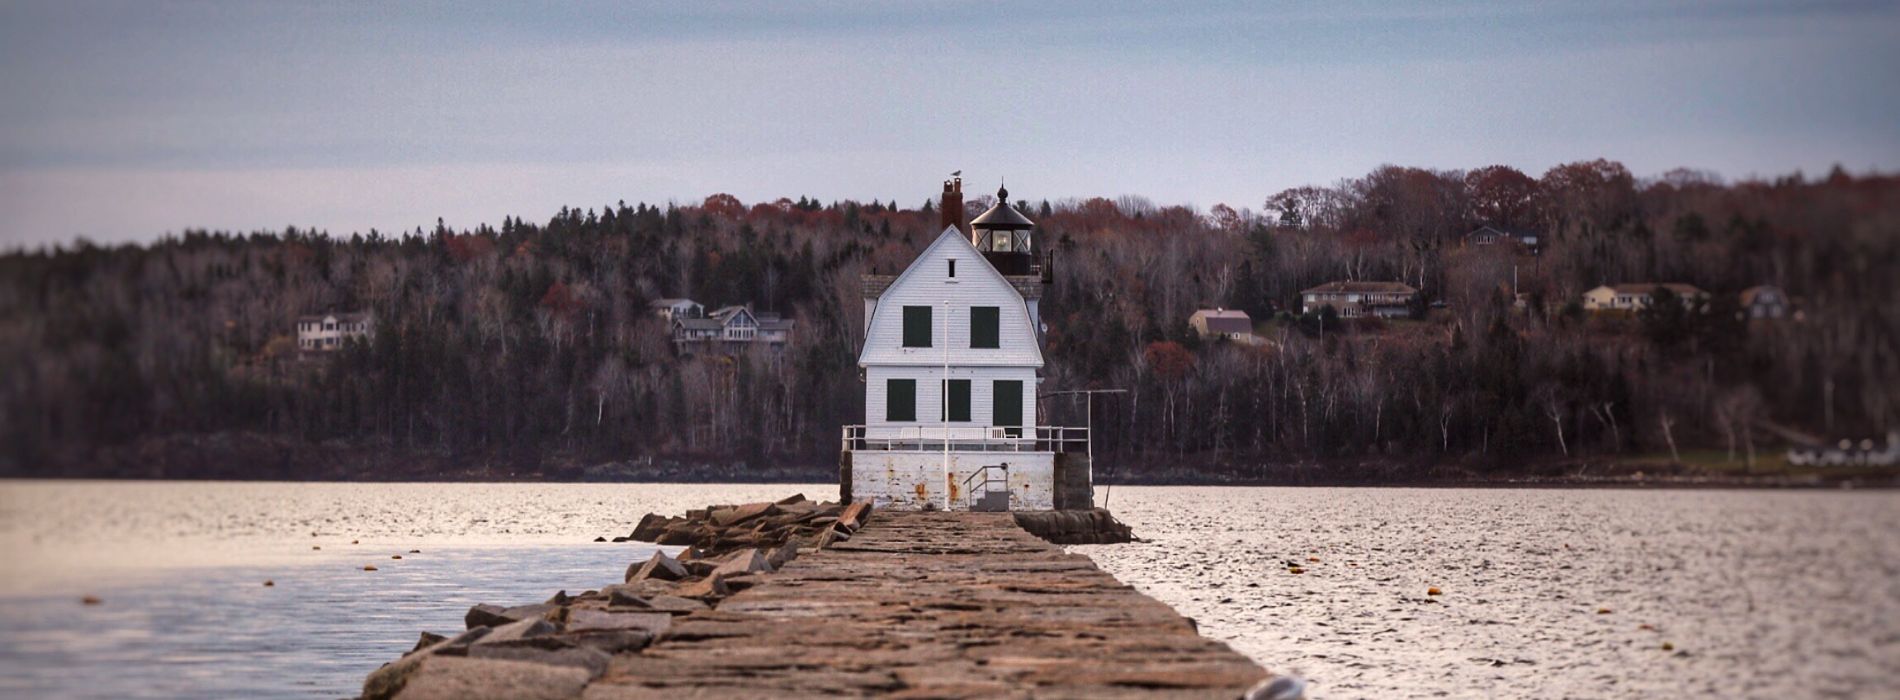 Haunted lighthouses in maine - Madeinsea©